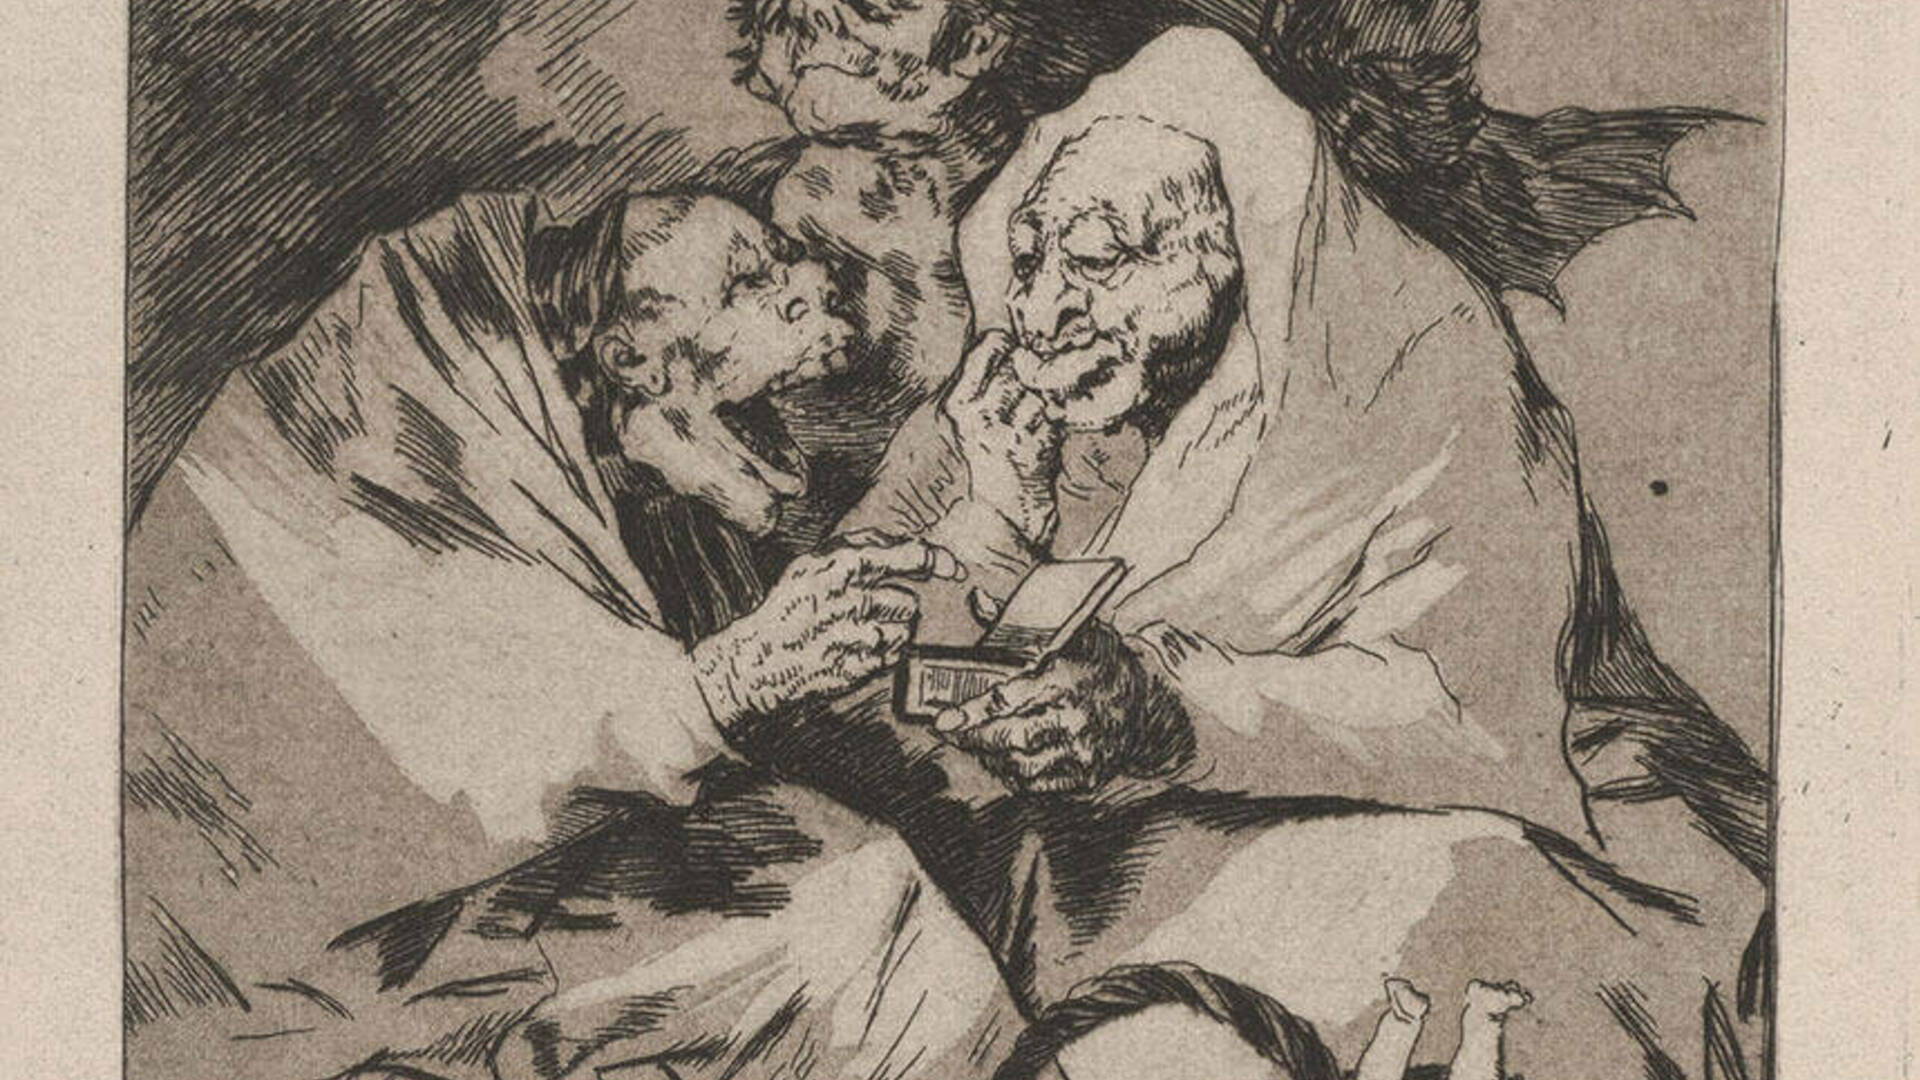 Francisco de Goya (Spanish, 1746–1828), Los Caprichos: Mucho Hay Que Chupar, plate 45 [The Capriccios: There Is Plenty To Suck], etching. Acquired with funds provided by the Humana Endowment for American Art, 1991.001.004